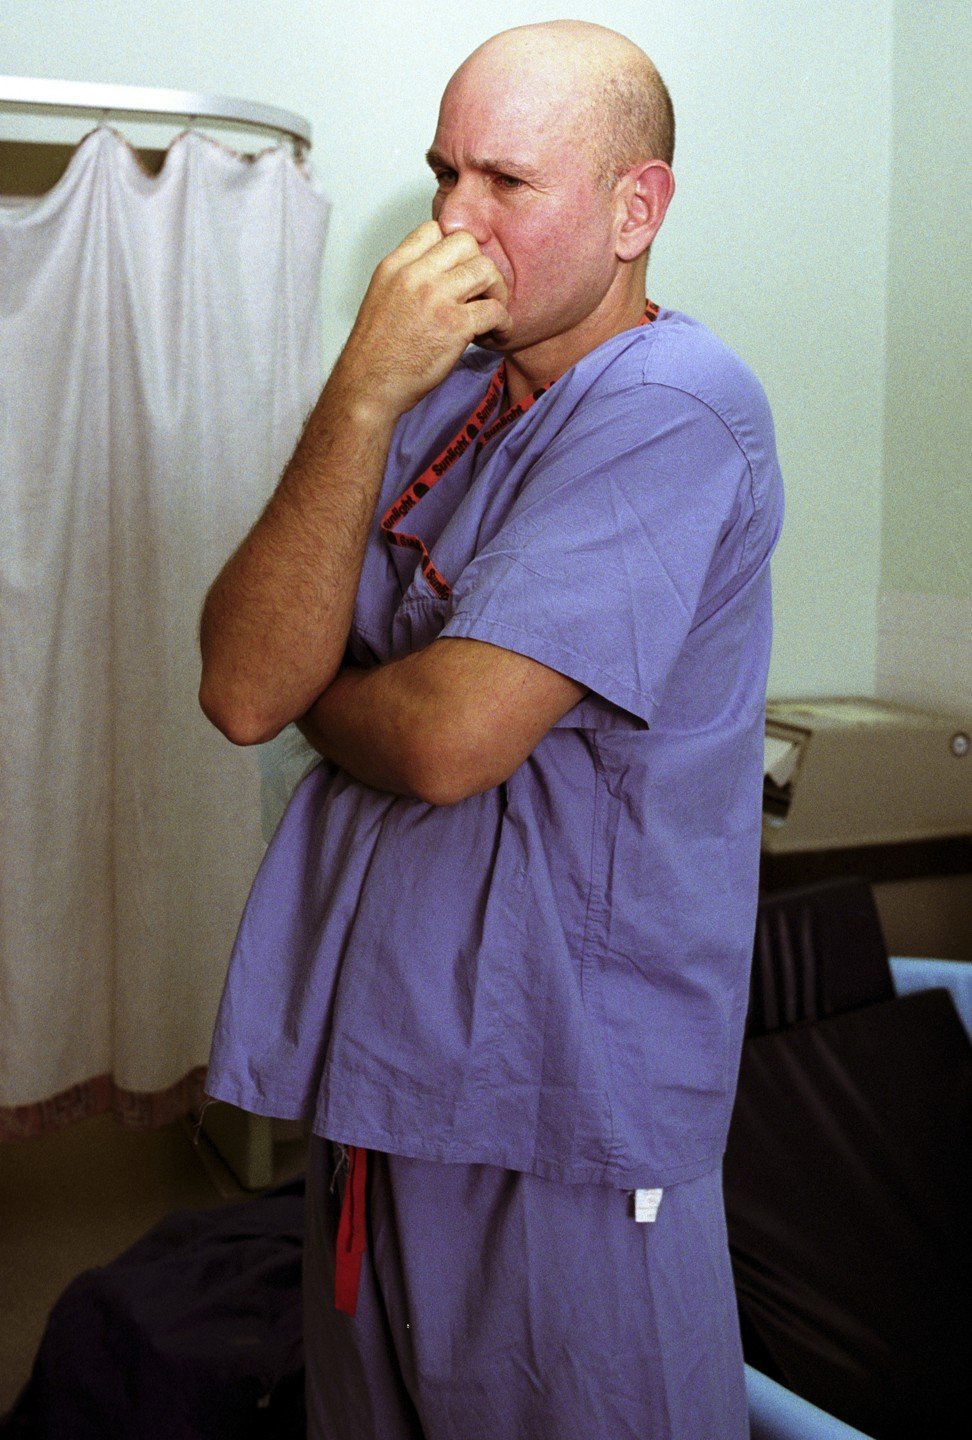 Being in a delivery room is not for all fathers. Photo: Alamy